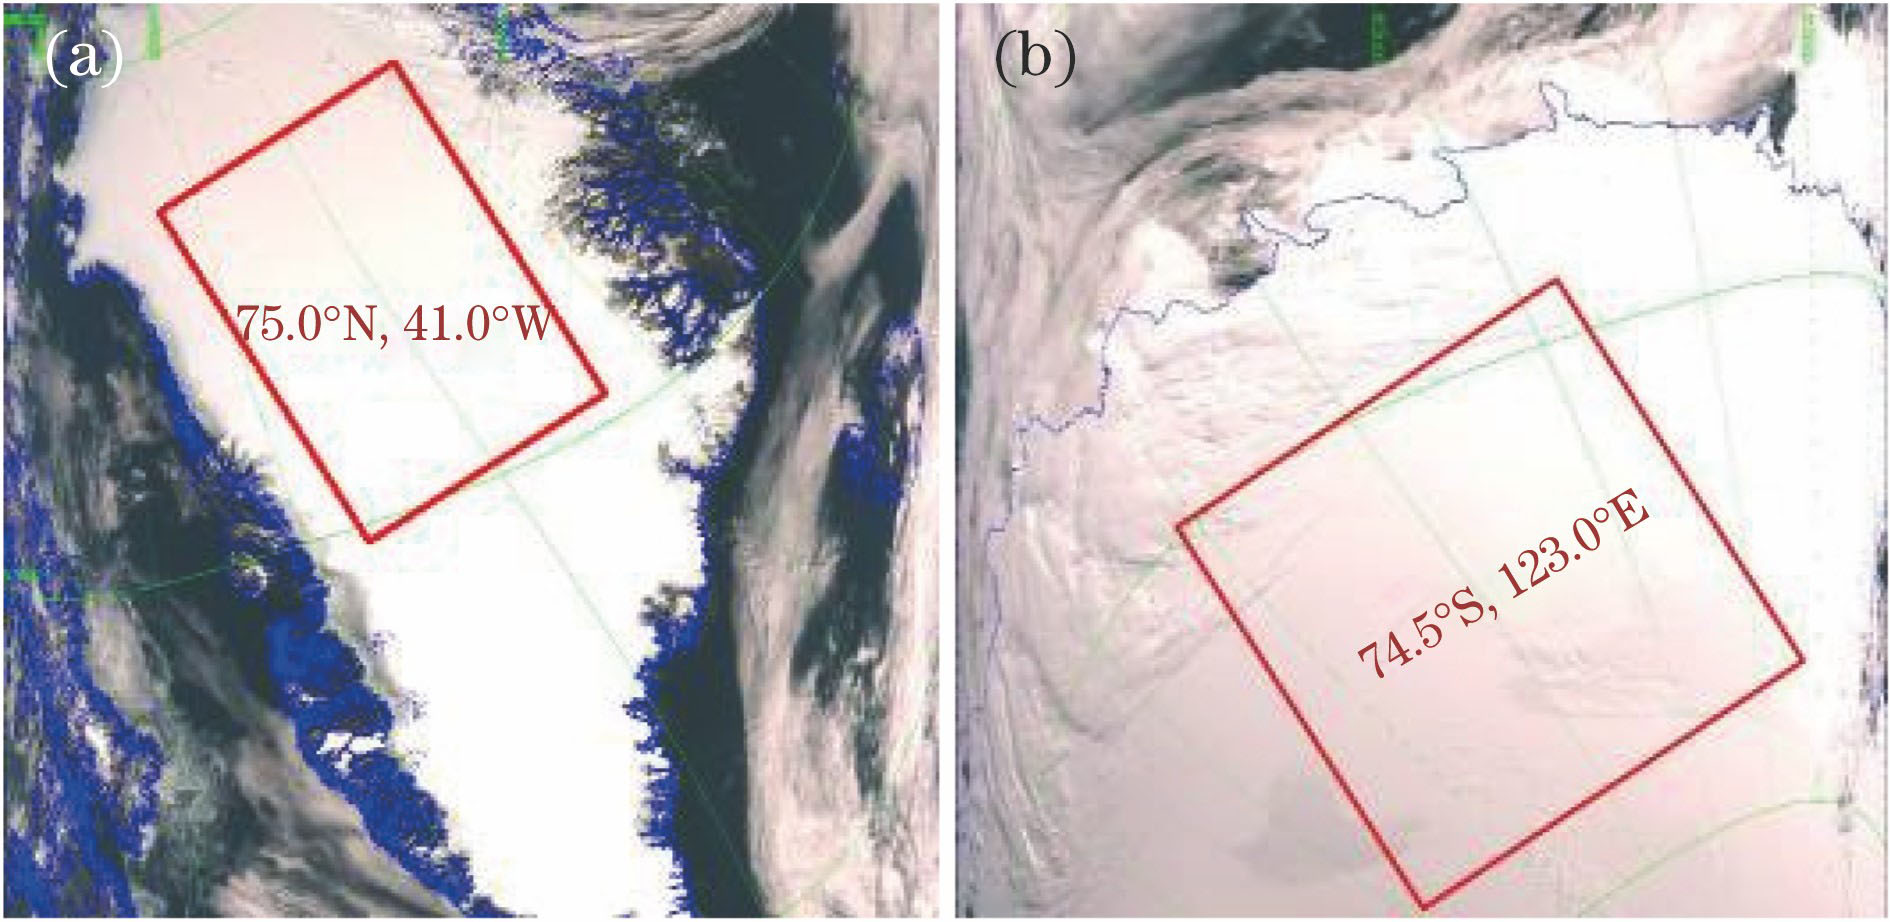 FY-3A/MERSI RGB images acquired over snow targets in south and north poles. (a) Greenland; (b) Dome C